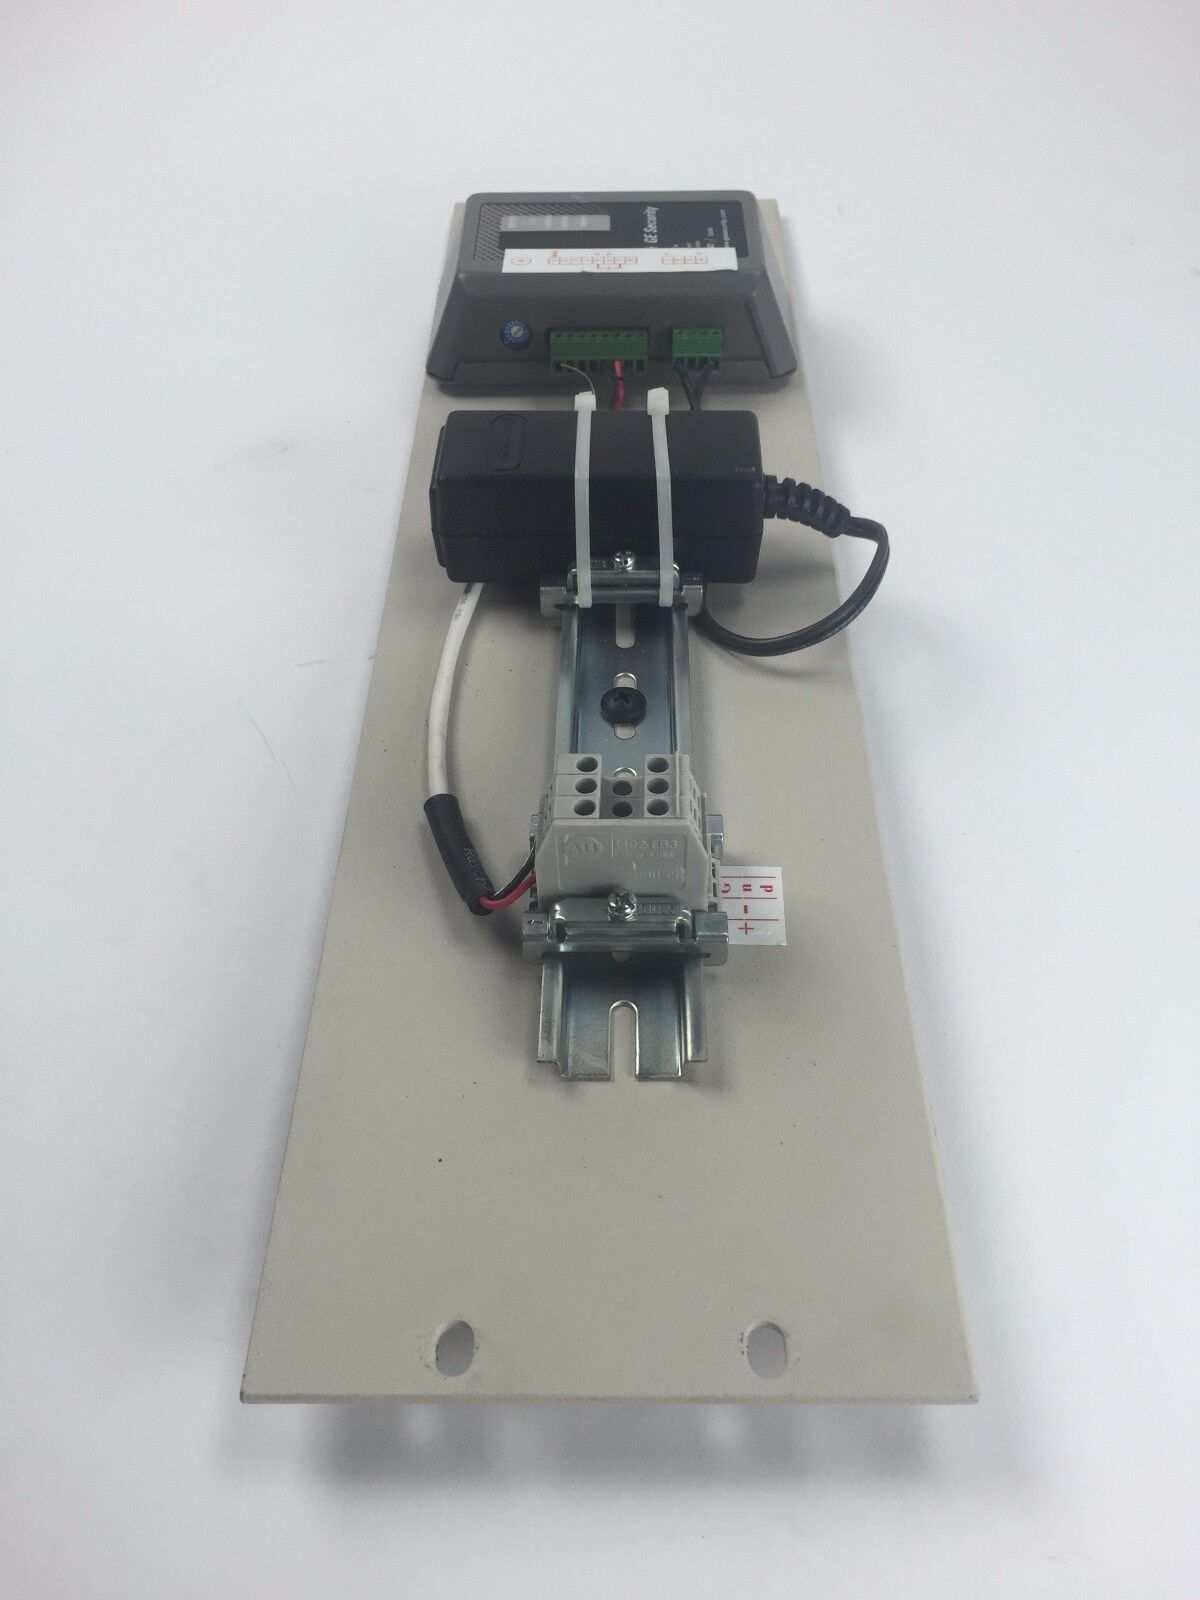 GE Security S711DT-EST1 S711DTEST1 Data Transceiver Repeater w/ Power Supply